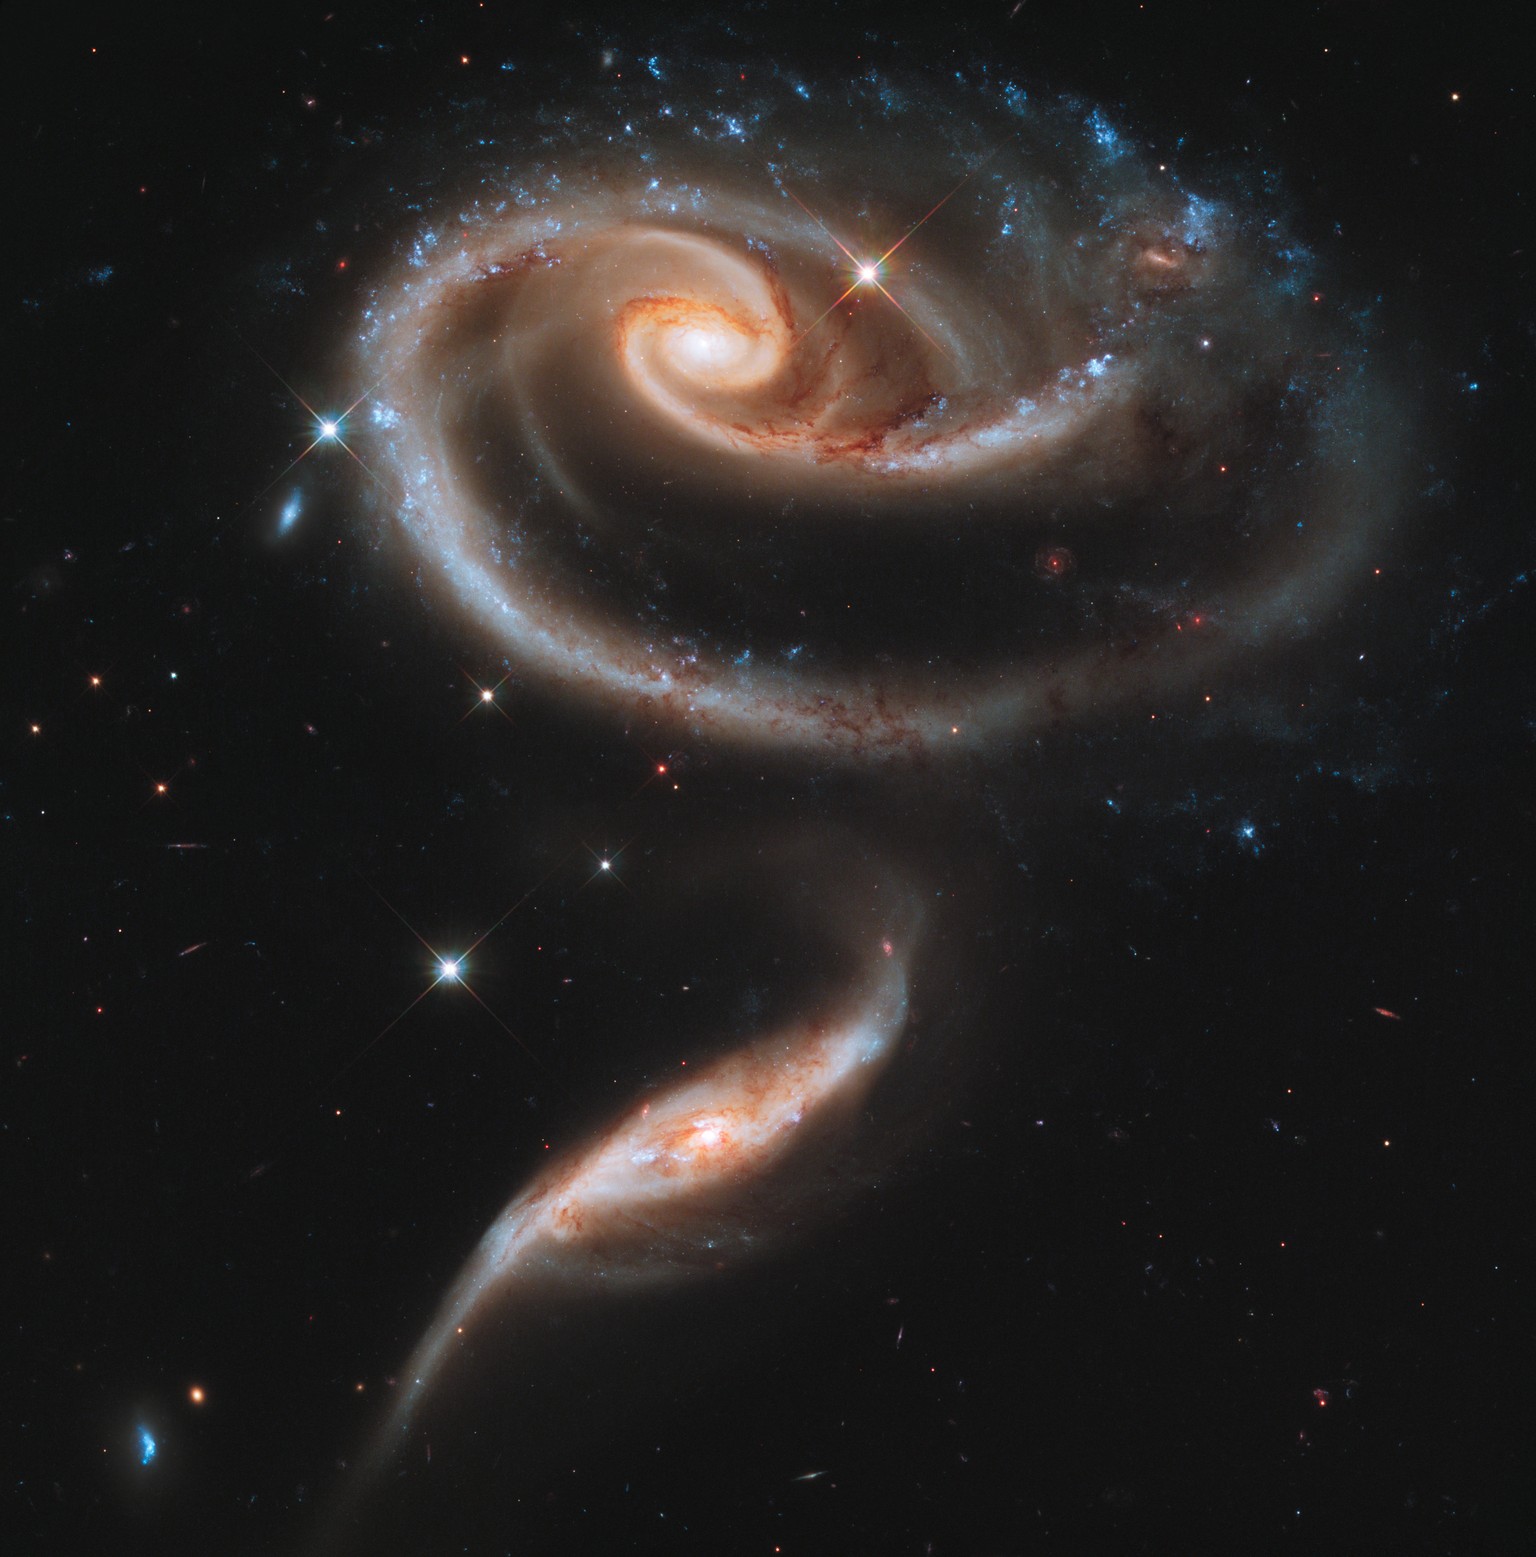 This image of a pair of interacting galaxies called Arp 273 was released to celebrate the 21st anniversary of the launch of the NASA/ESA Hubble Space Telescope. The distorted shape of the larger of th ...